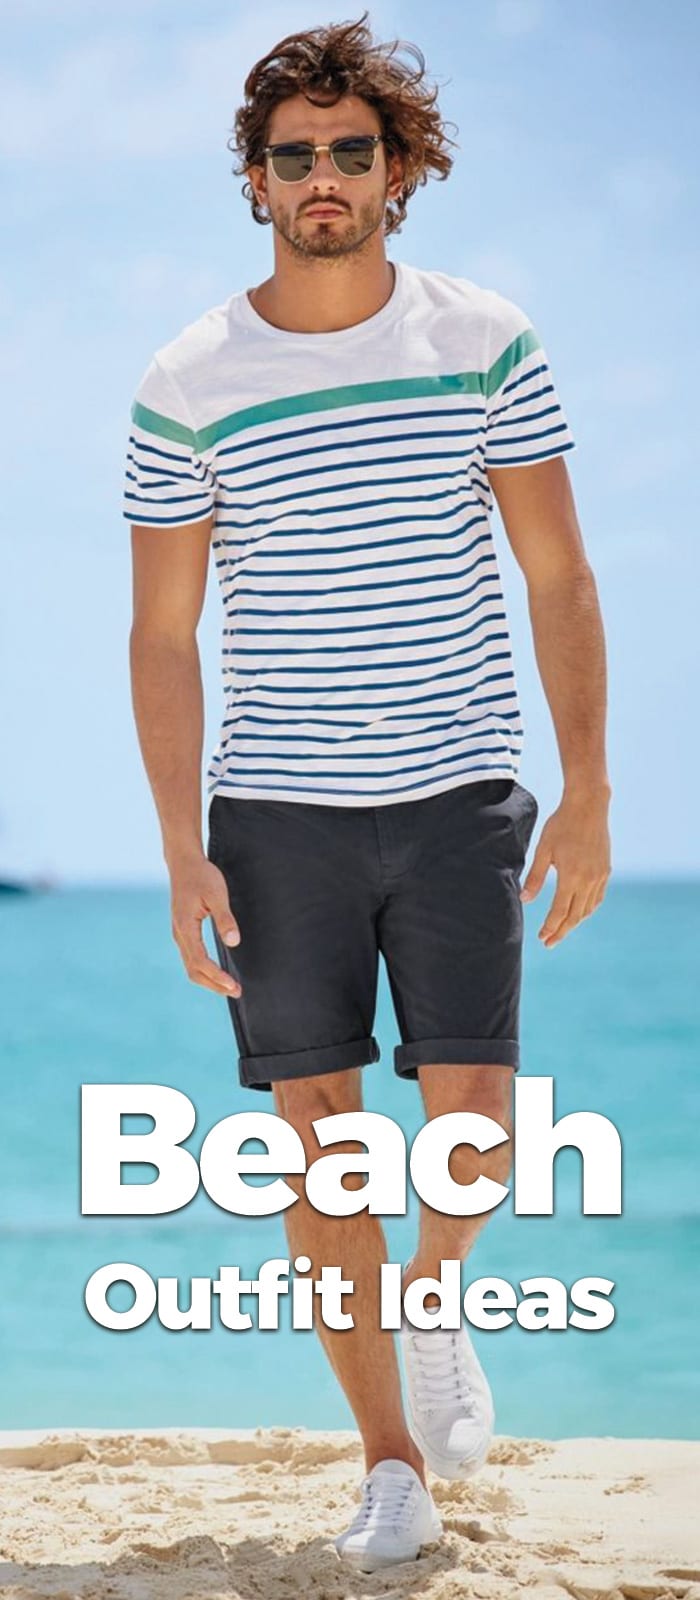 Men's Beach Outfit Ideas for Summer